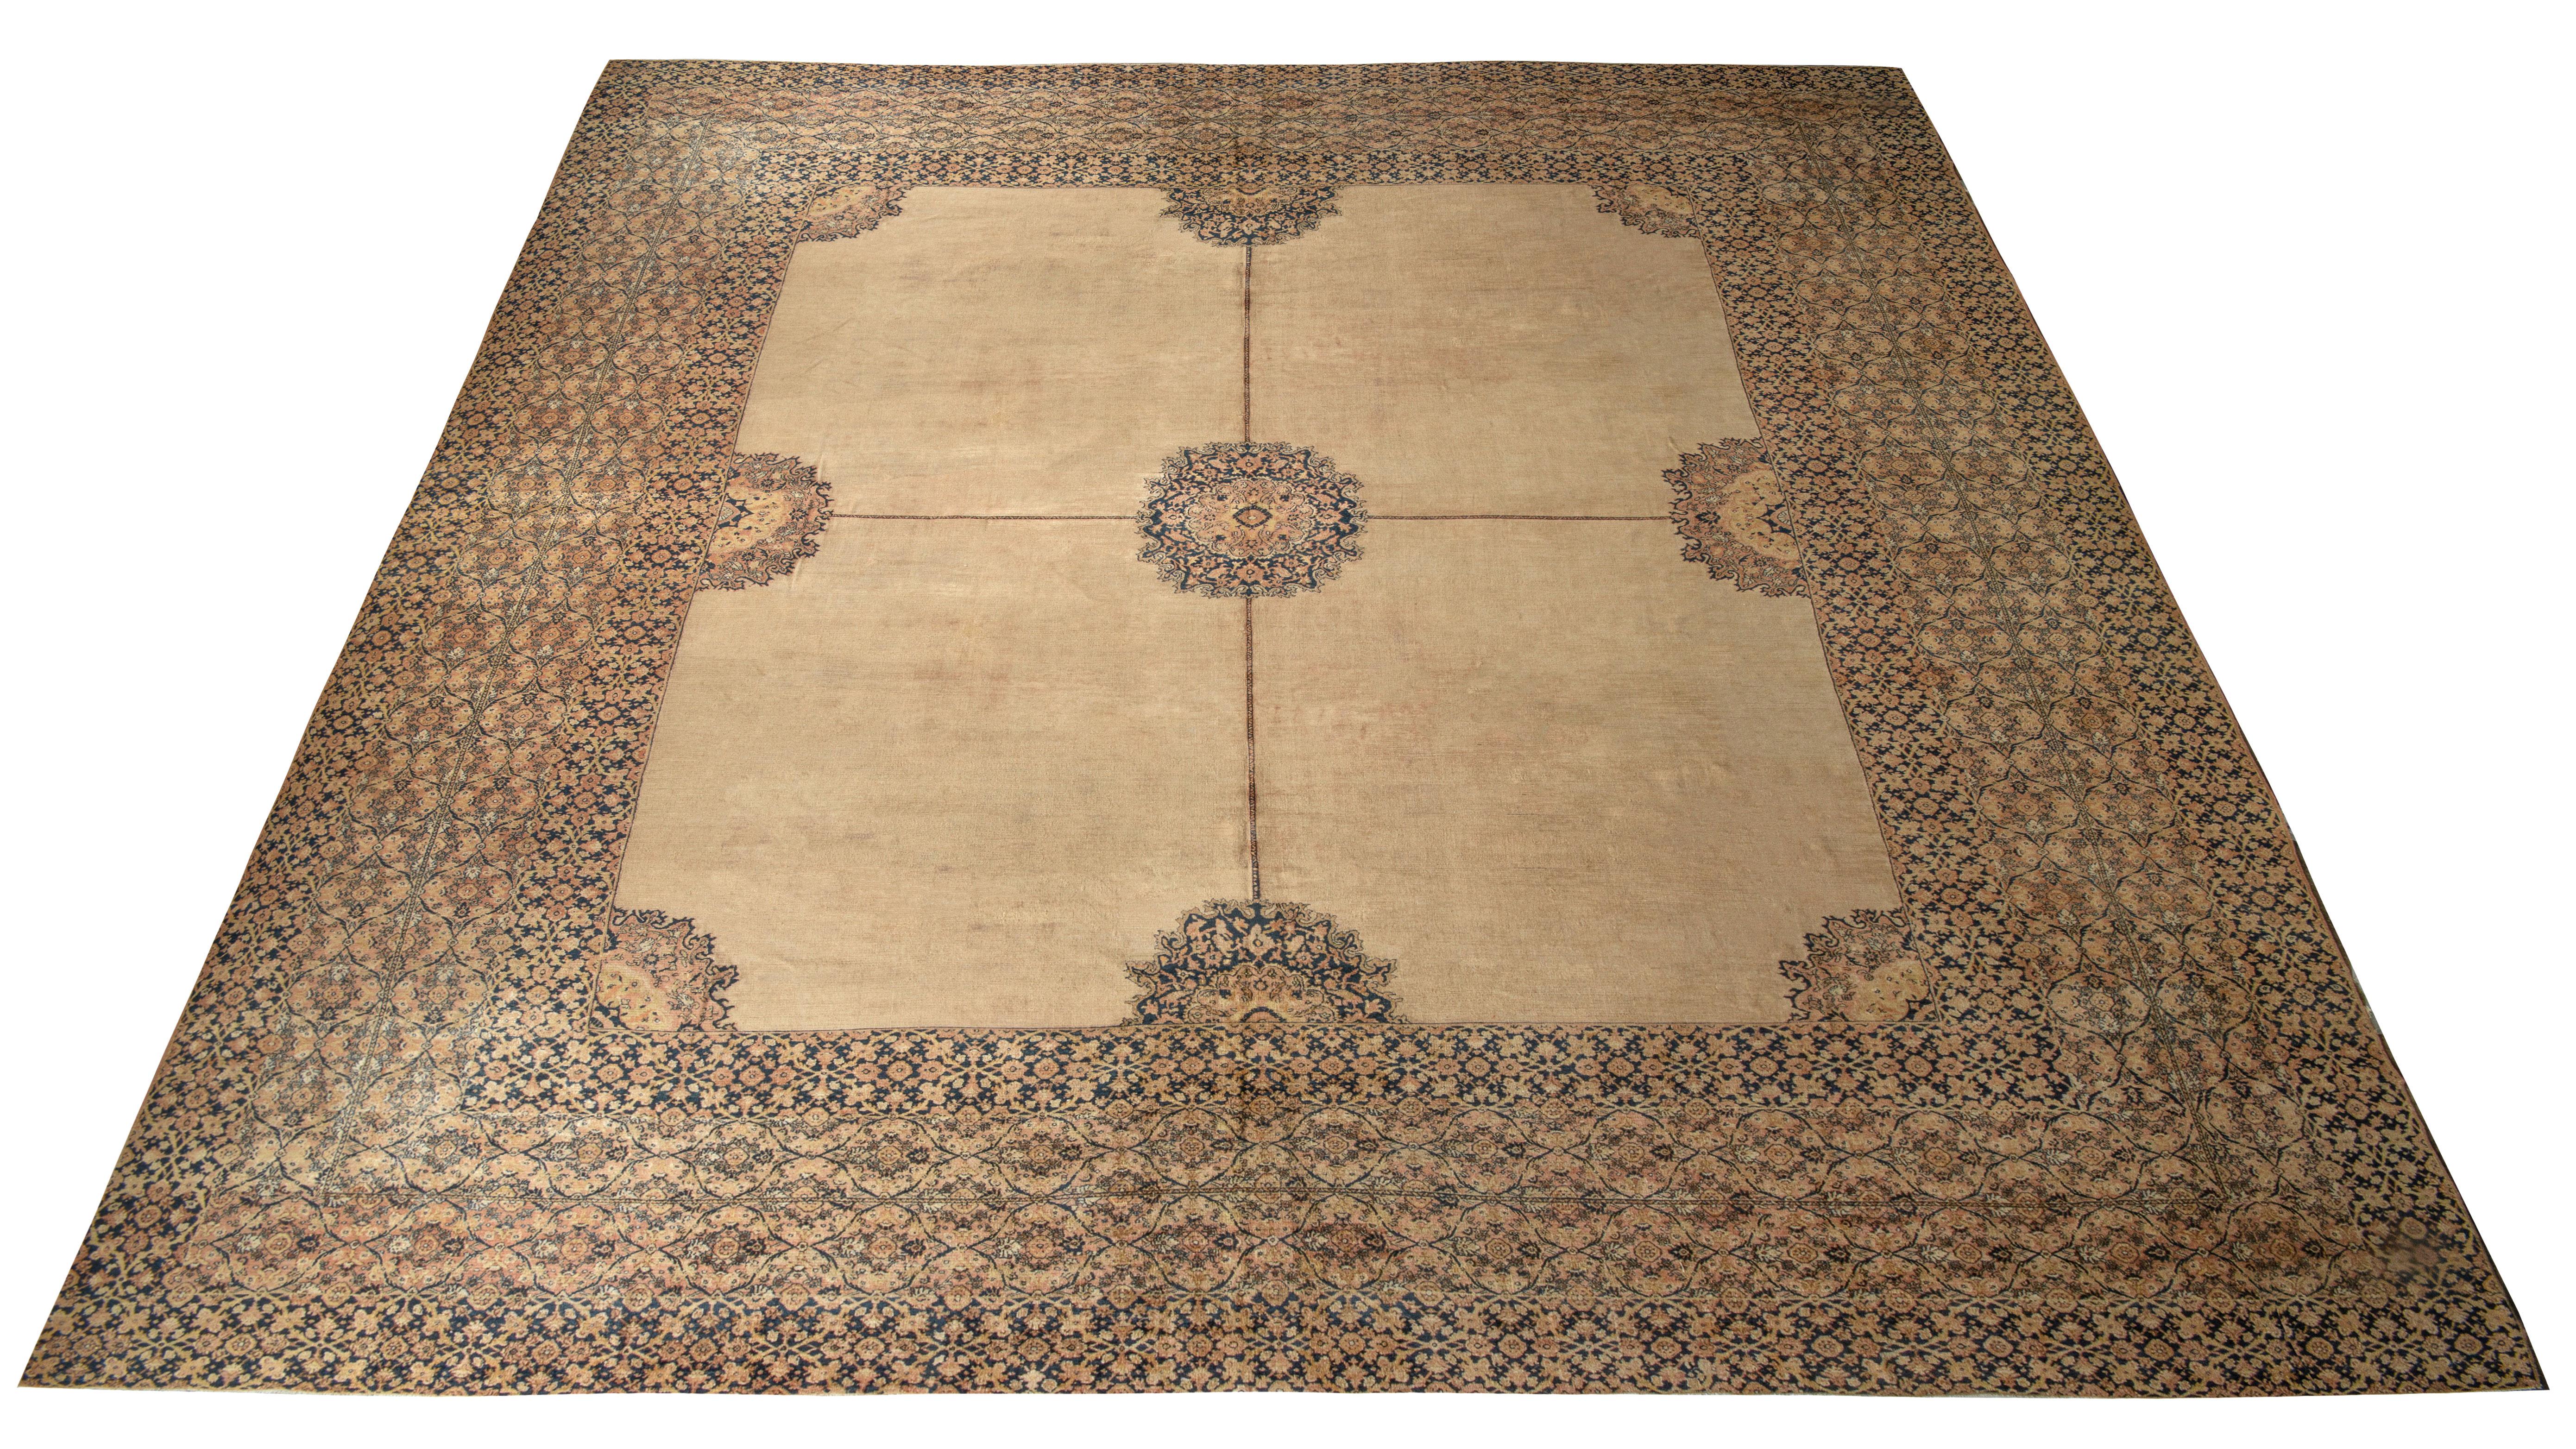 Hand knotted in wool, a 19x22 Doroksh rug joining Rug & Kilim’s Antique & Vintage collection. Originating circa 1920-1930, the rug displays exemplary work of art through a medallion style floral pattern with a black colorway, complemented